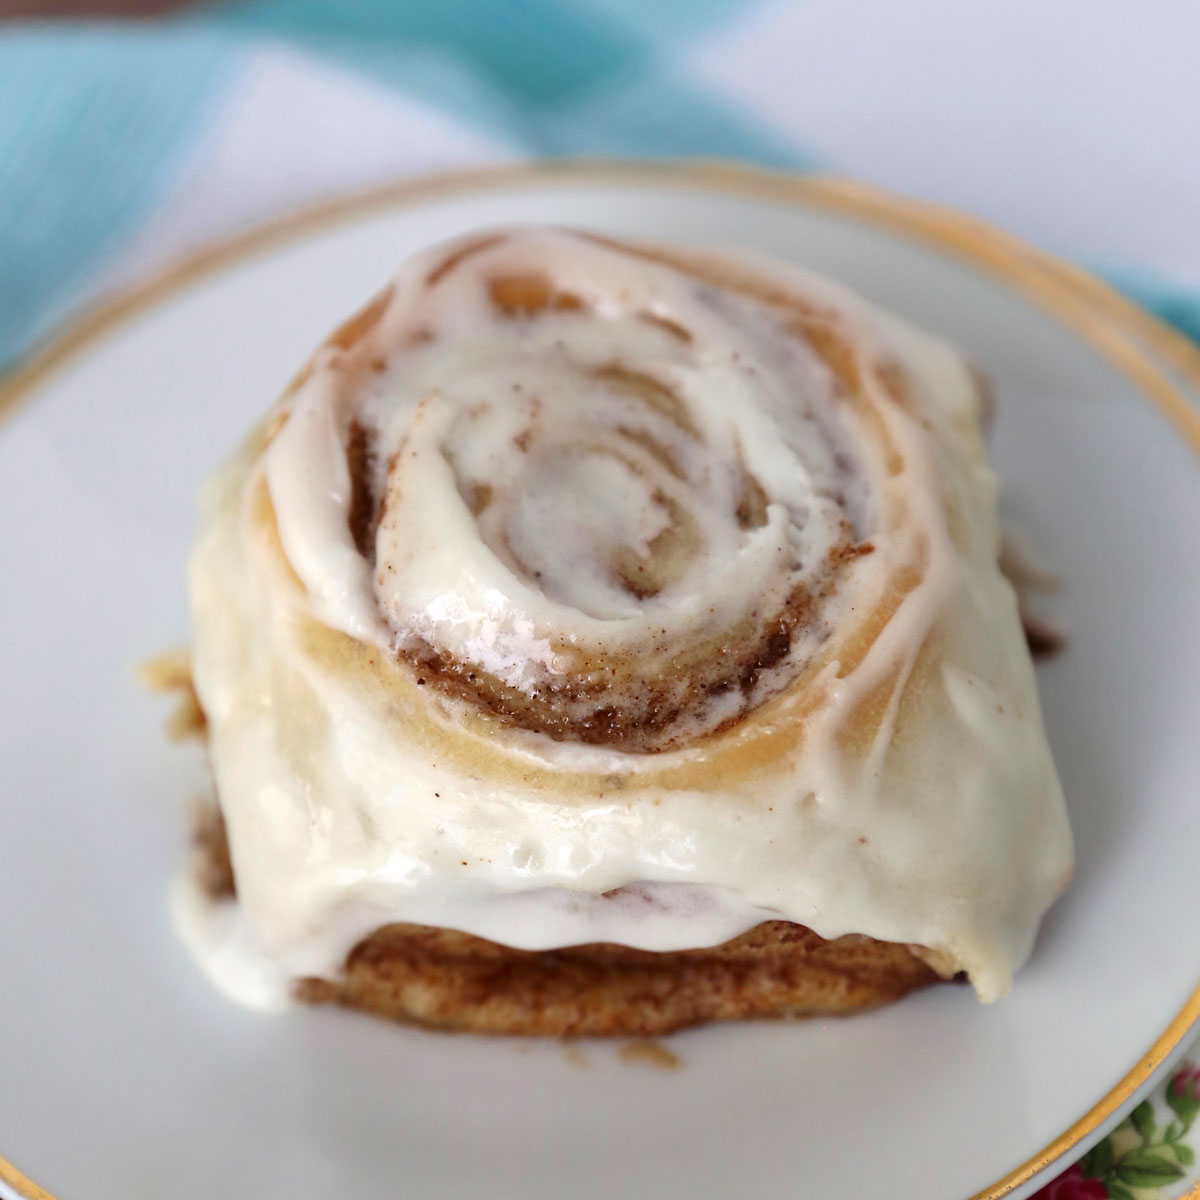 A cinnamon roll on a small plate